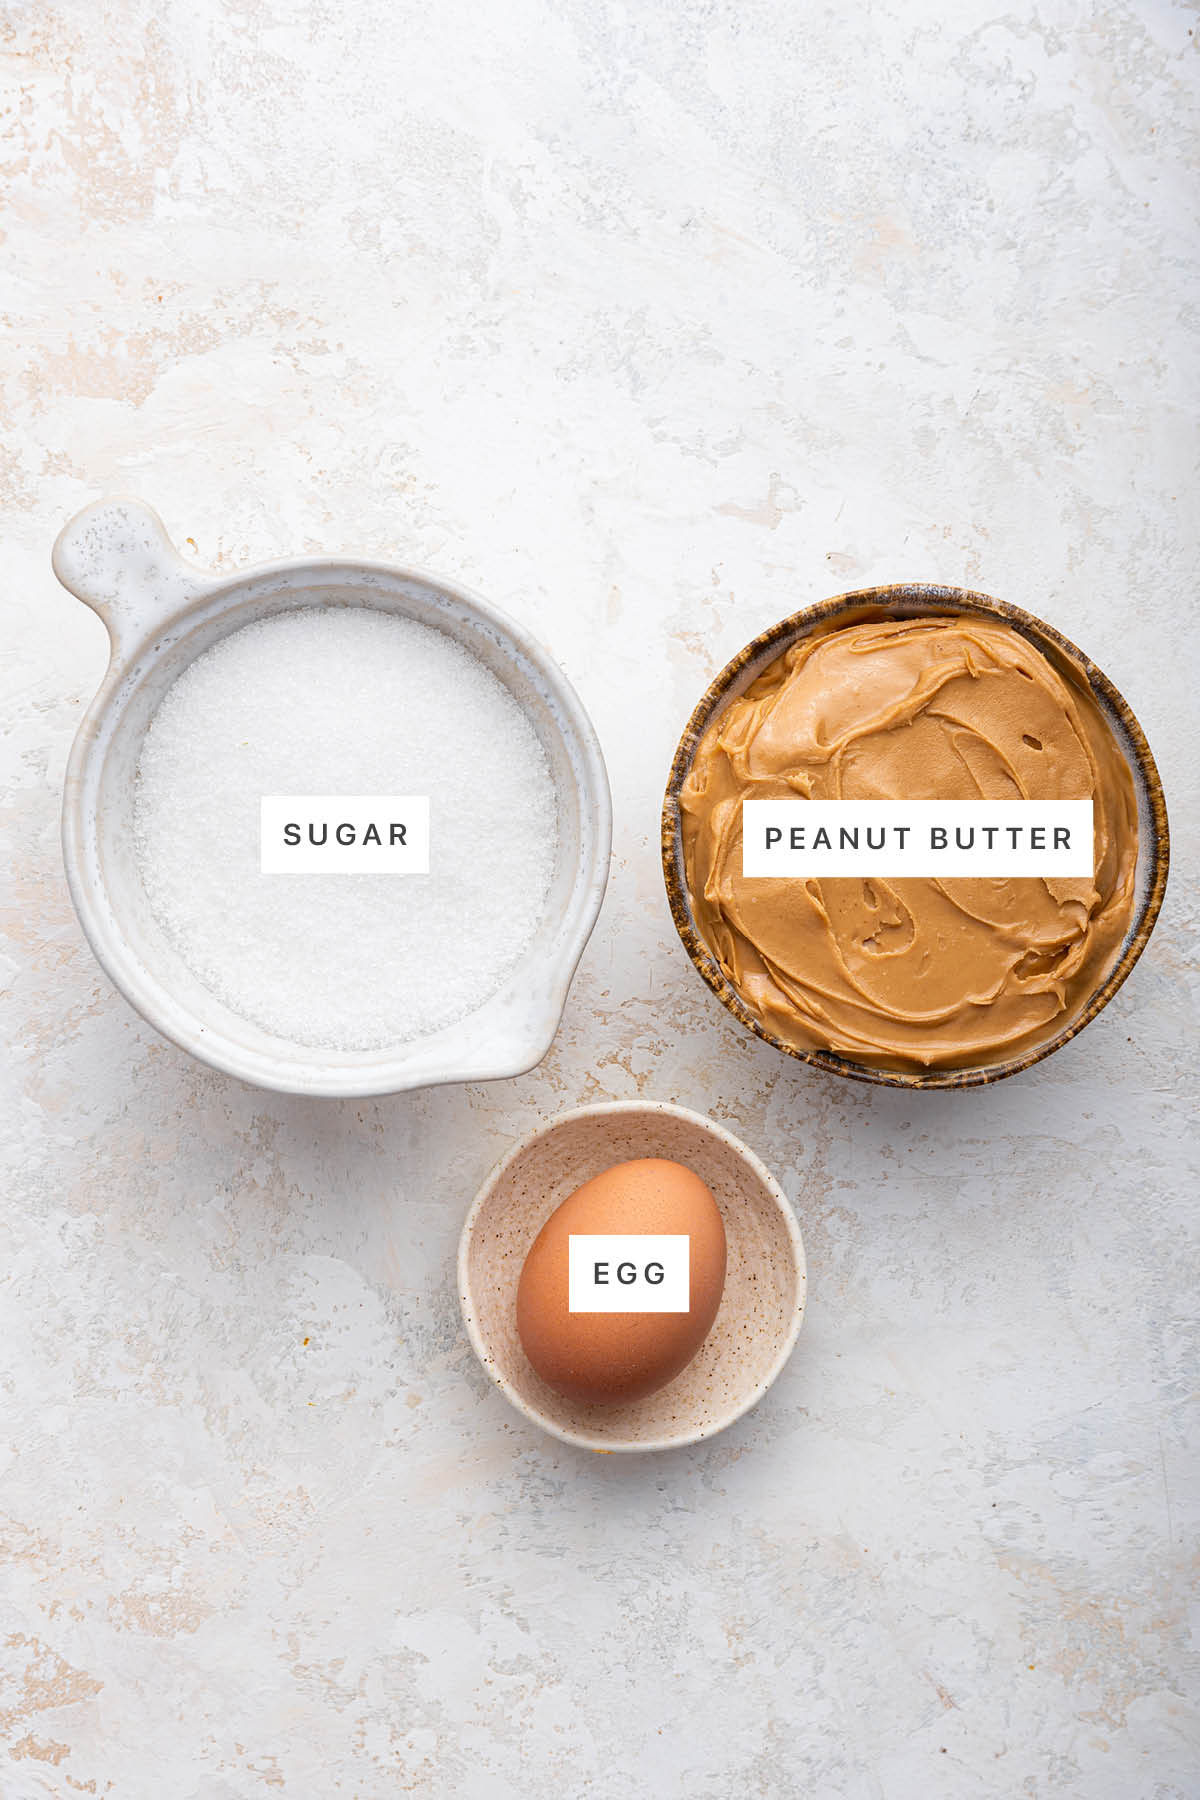 Ingredients measured out to make 3 Ingredient Peanut Butter Cookies: sugar, peanut butter and egg.